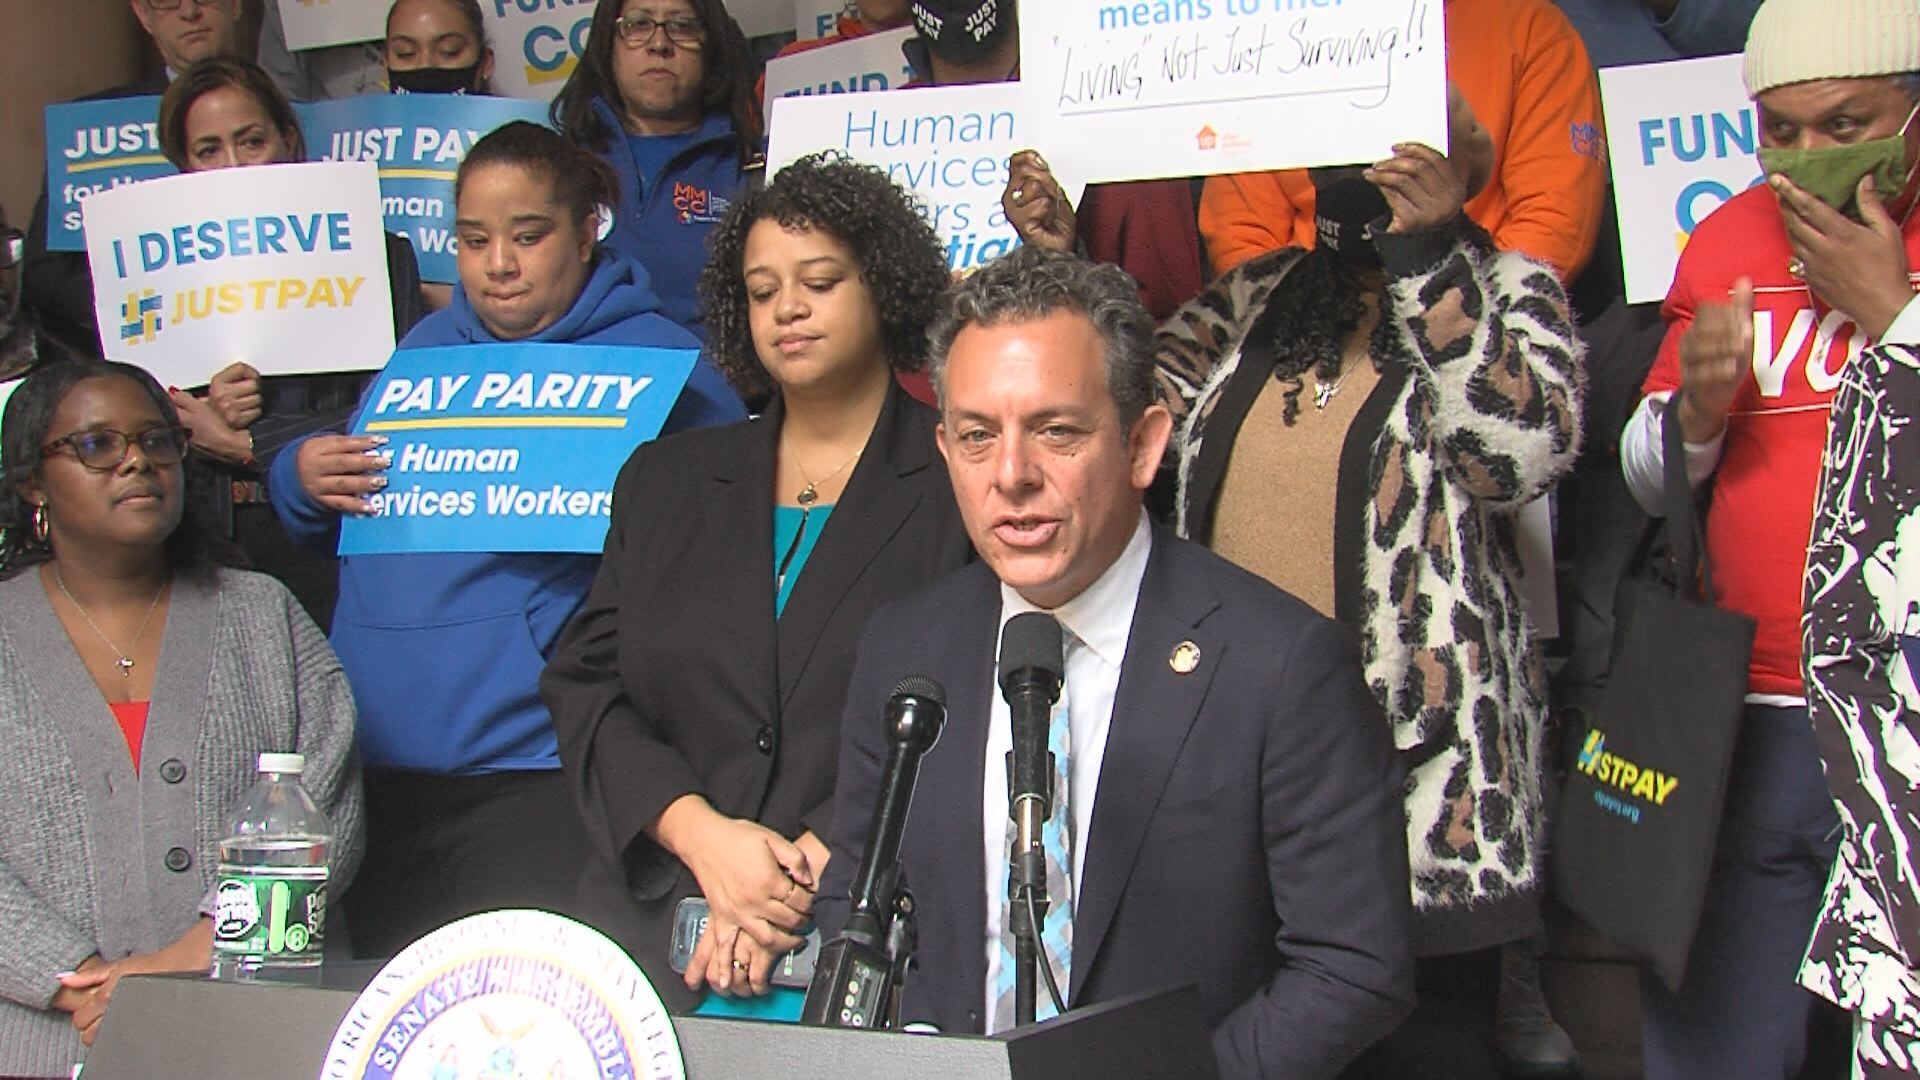 Assemblymember Simone Calls for Fair Pay for Human Services Workers